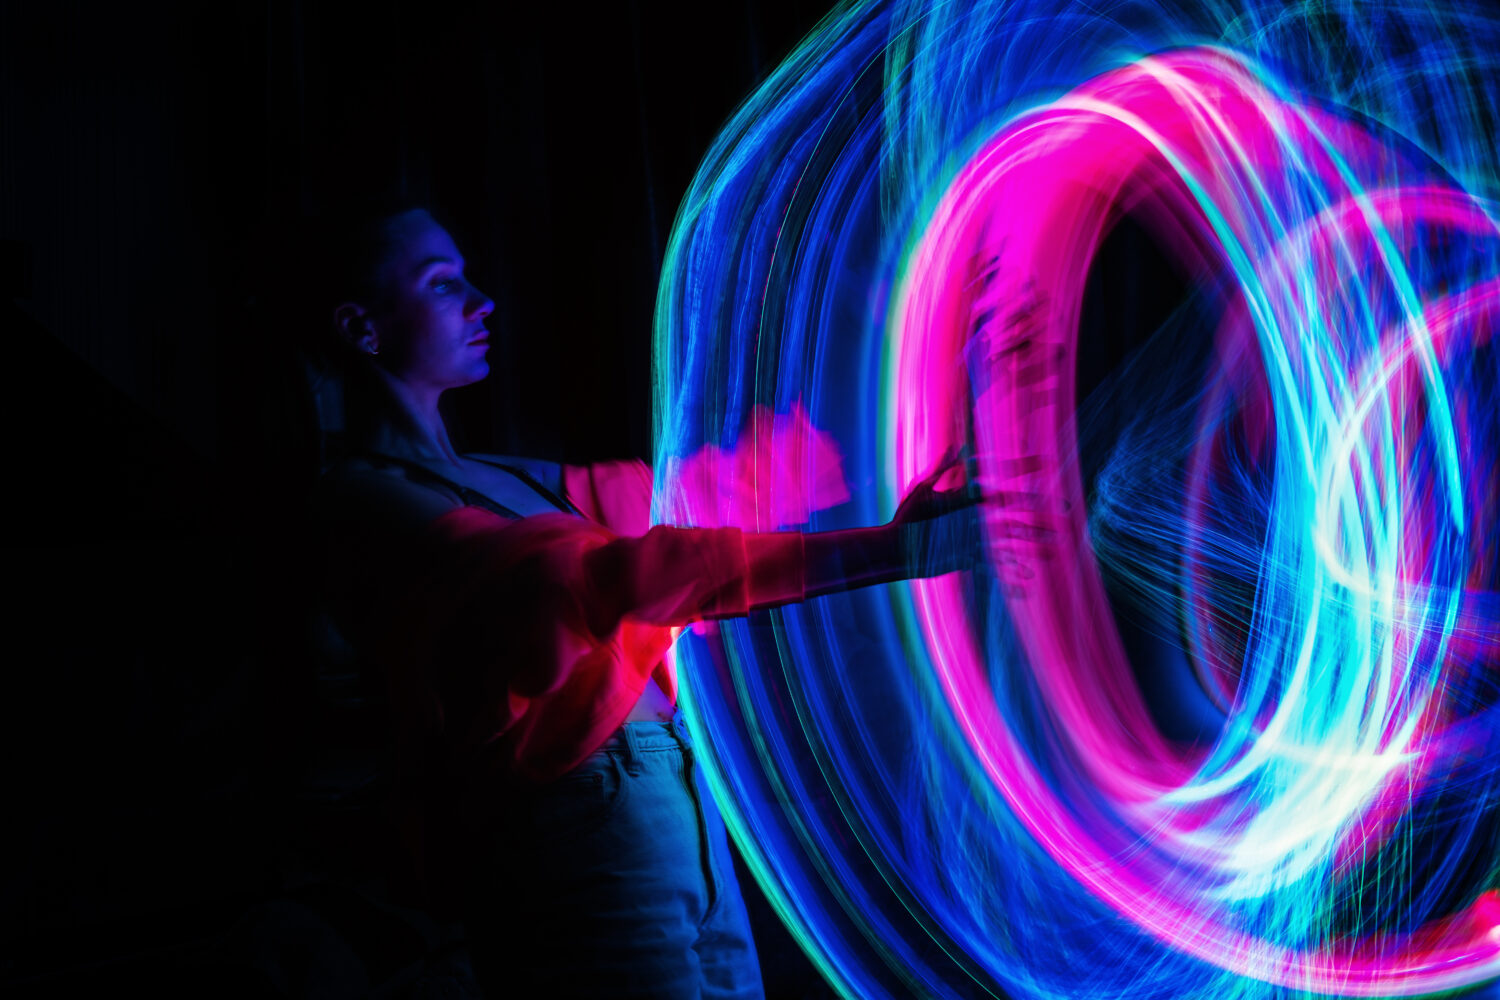 Digital avatar of a woman in a virtual reality setting with neon blur lines